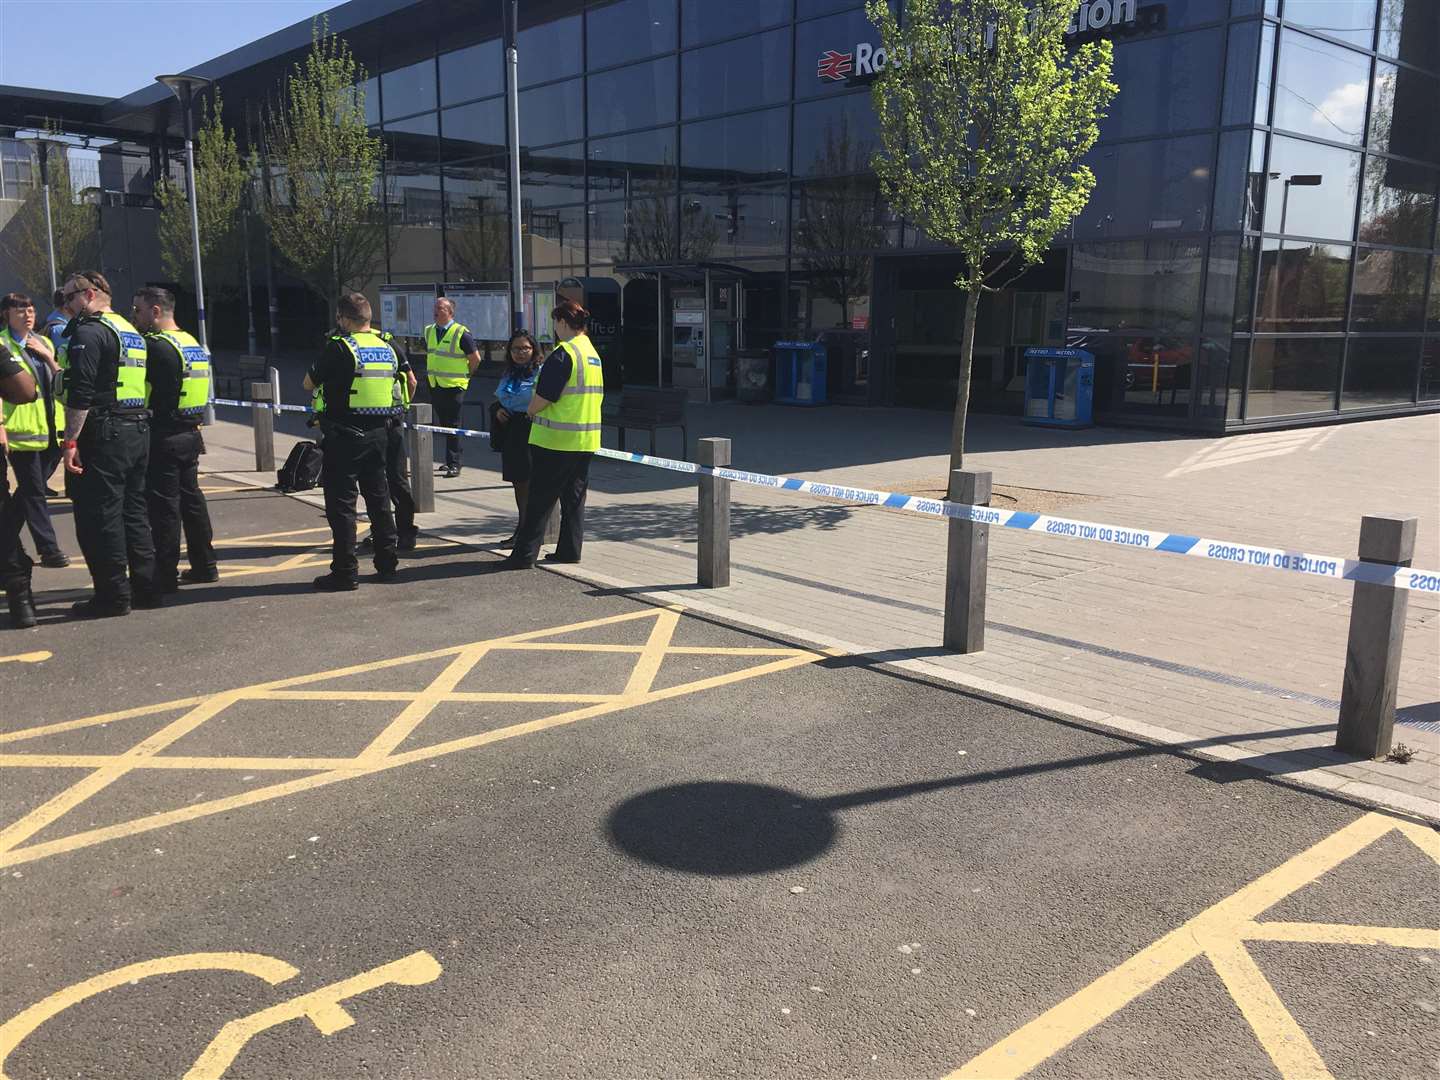 Second world war bomb discovered at Rochester station (1576623)